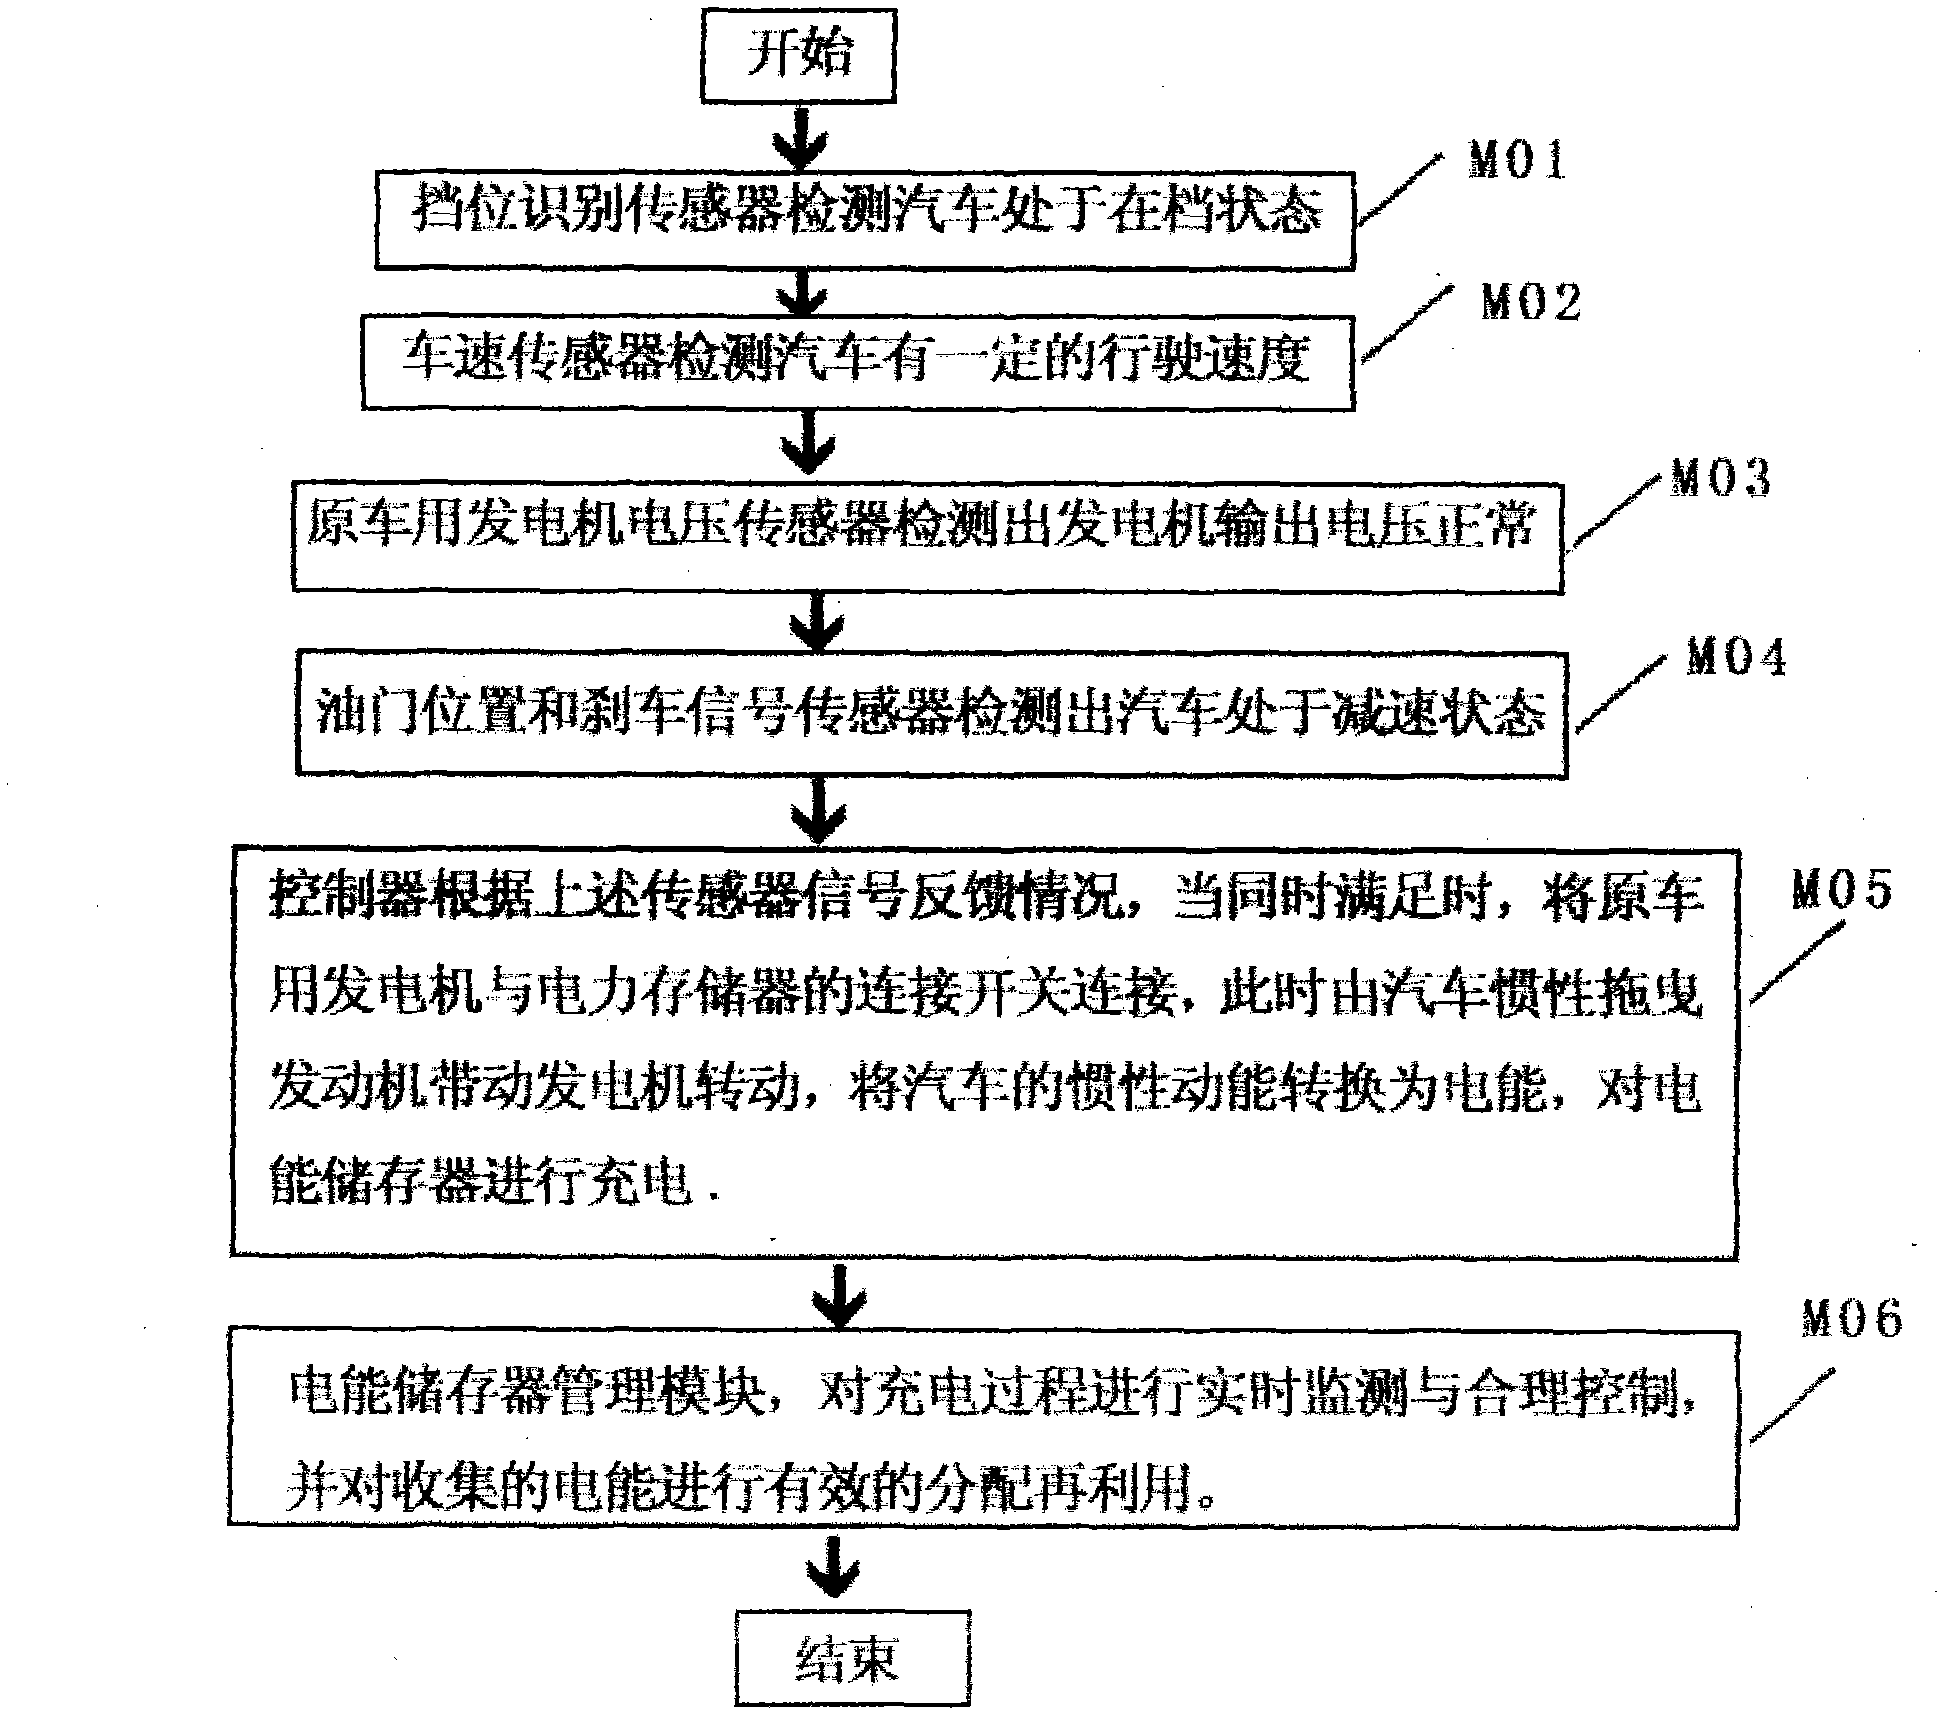 Automobile deceleration inertial kinetic energy recovery system and method